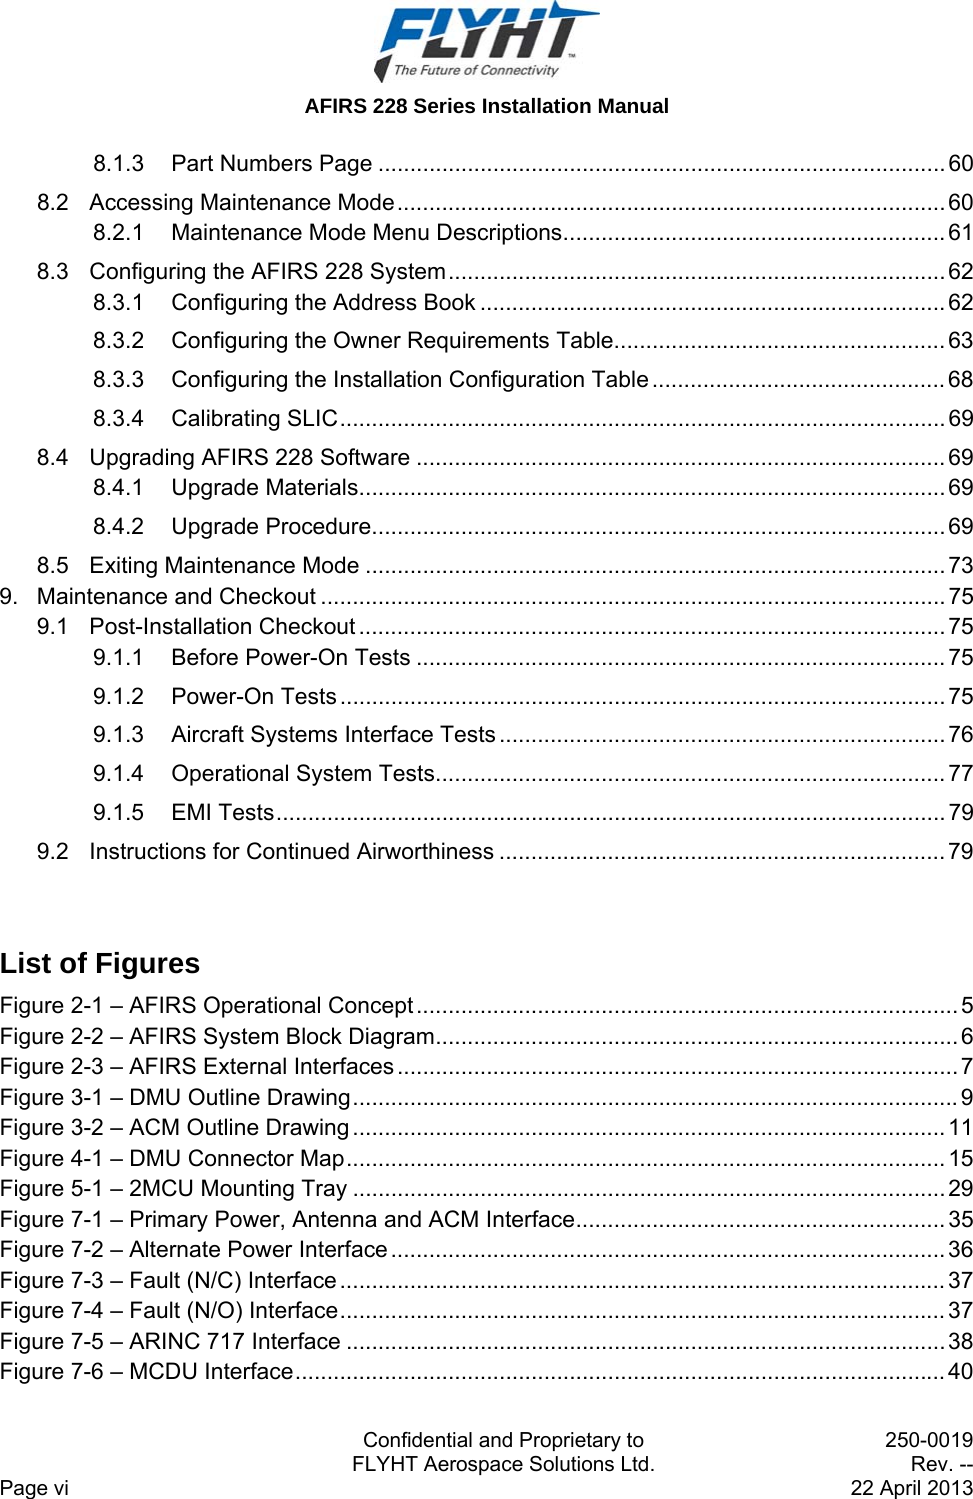  AFIRS 228 Series Installation Manual   Confidential and Proprietary to  250-0019   FLYHT Aerospace Solutions Ltd.  Rev. -- Page vi    22 April 2013 8.1.3Part Numbers Page ......................................................................................... 608.2Accessing Maintenance Mode ...................................................................................... 608.2.1Maintenance Mode Menu Descriptions ............................................................ 618.3Configuring the AFIRS 228 System .............................................................................. 628.3.1Configuring the Address Book ......................................................................... 628.3.2Configuring the Owner Requirements Table .................................................... 638.3.3Configuring the Installation Configuration Table .............................................. 688.3.4Calibrating SLIC ............................................................................................... 698.4Upgrading AFIRS 228 Software ................................................................................... 698.4.1Upgrade Materials ............................................................................................ 698.4.2Upgrade Procedure .......................................................................................... 698.5Exiting Maintenance Mode ........................................................................................... 739.Maintenance and Checkout .................................................................................................. 759.1Post-Installation Checkout ............................................................................................ 759.1.1Before Power-On Tests ................................................................................... 759.1.2Power-On  Tests ............................................................................................... 759.1.3Aircraft Systems Interface Tests ...................................................................... 769.1.4Operational System Tests ................................................................................ 779.1.5EMI Tests ......................................................................................................... 799.2Instructions for Continued Airworthiness ...................................................................... 79  List of Figures Figure 2-1 – AFIRS Operational Concept ..................................................................................... 5Figure 2-2 – AFIRS System Block Diagram .................................................................................. 6Figure 2-3 – AFIRS External Interfaces ........................................................................................ 7 Figure 3-1 – DMU Outline Drawing ............................................................................................... 9Figure 3-2 – ACM Outline Drawing ............................................................................................. 11Figure 4-1 – DMU Connector Map .............................................................................................. 15Figure 5-1 – 2MCU Mounting Tray ............................................................................................. 29Figure 7-1 – Primary Power, Antenna and ACM Interface .......................................................... 35Figure 7-2 – Alternate Power Interface ....................................................................................... 36Figure 7-3 – Fault (N/C) Interface ............................................................................................... 37Figure 7-4 – Fault (N/O) Interface ............................................................................................... 37Figure 7-5 – ARINC 717 Interface .............................................................................................. 38Figure 7-6 – MCDU Interface ...................................................................................................... 40